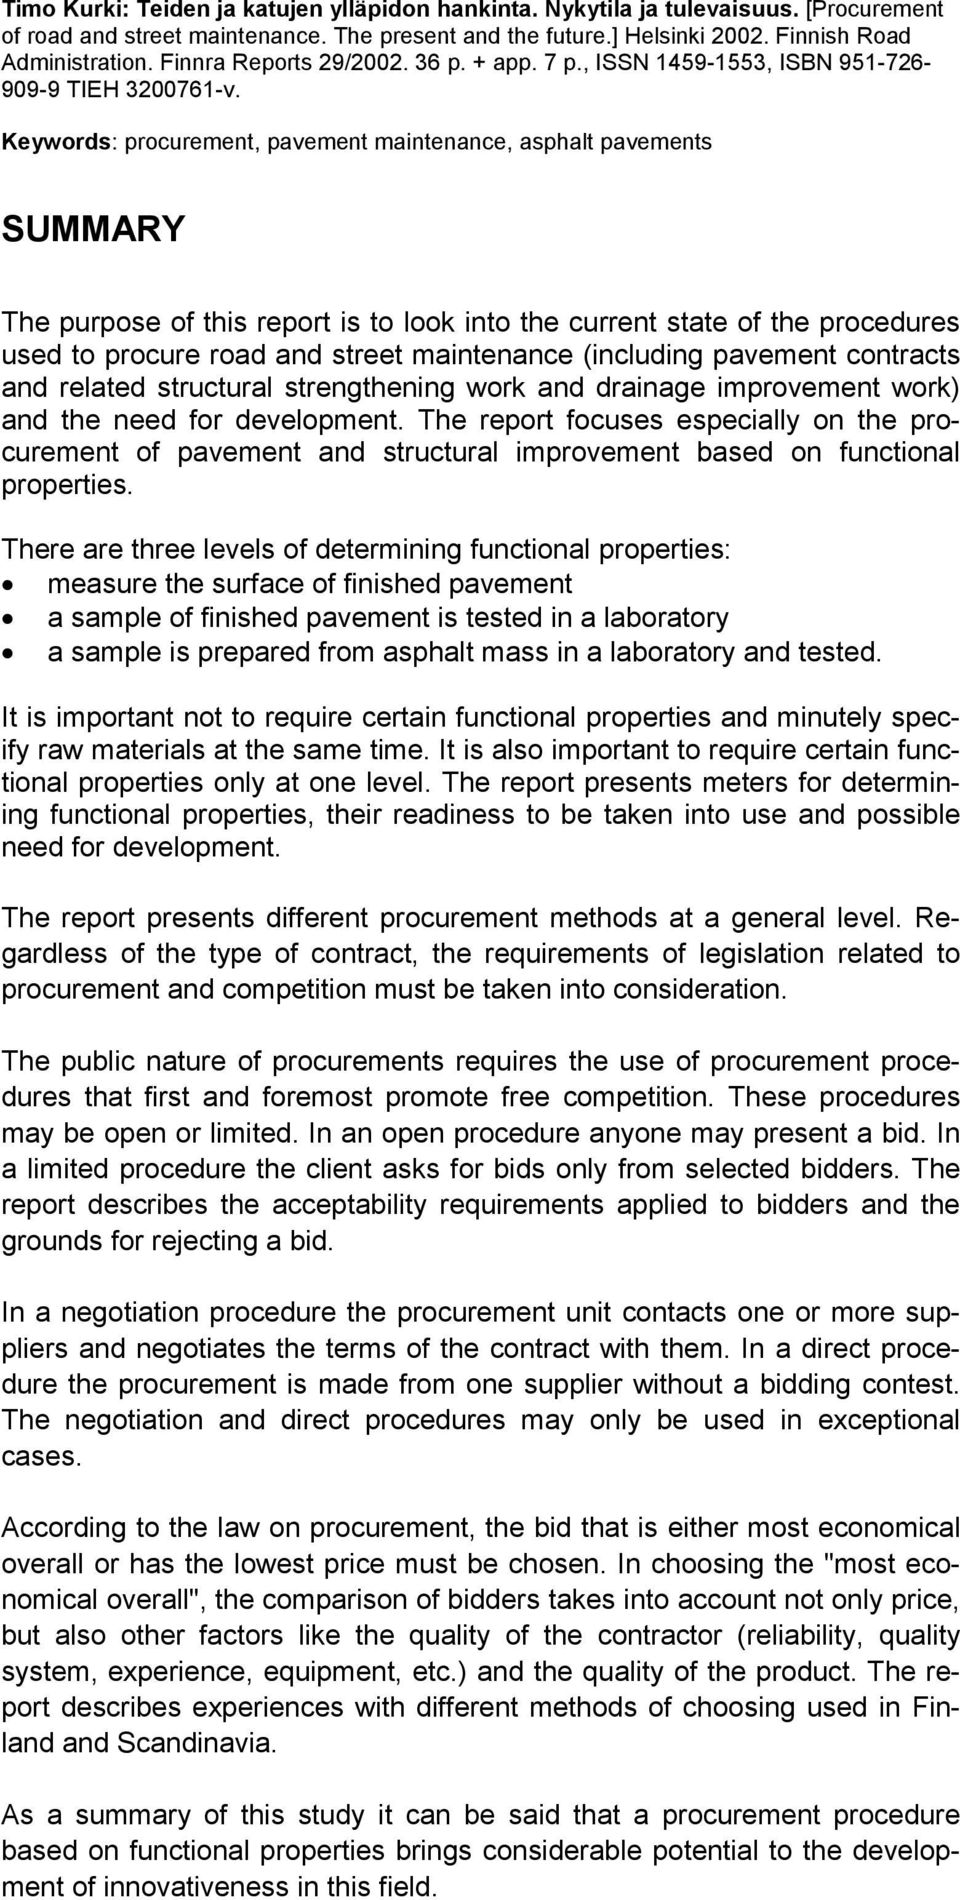 Keywords: procurement, pavement maintenance, asphalt pavements SUMMARY The purpose of this report is to look into the current state of the procedures used to procure road and street maintenance